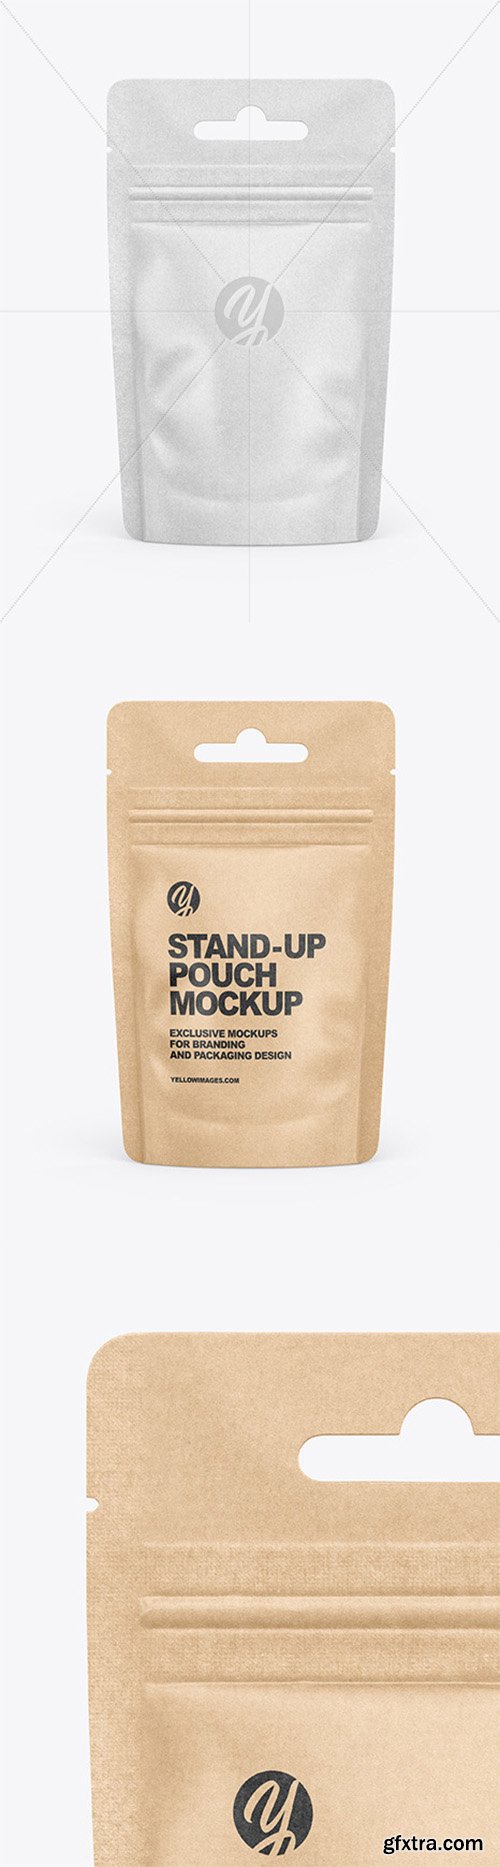 Download Yellowimages Mockups Kraft Stand Up Pouch Front View Yellowimages Yellowimages Mockups